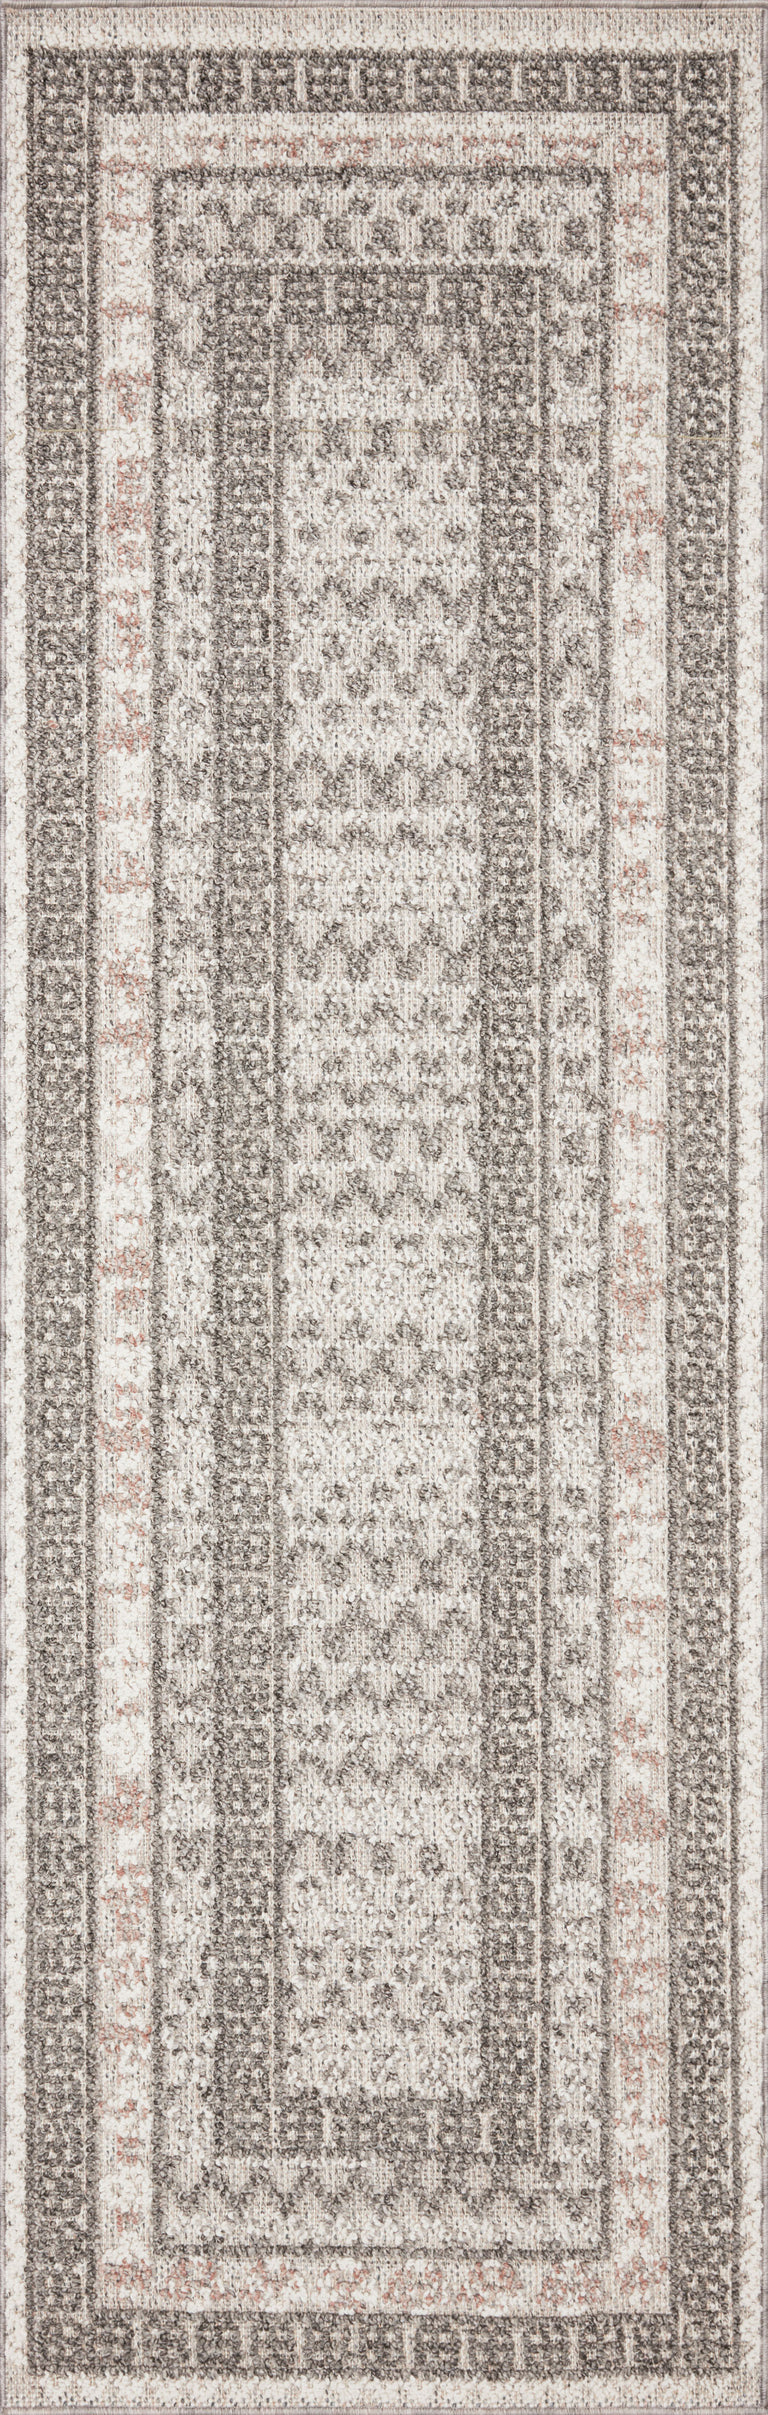 Loloi Rugs Cole Collection Rug in Grey, Multi - 9'6" x 12'8"